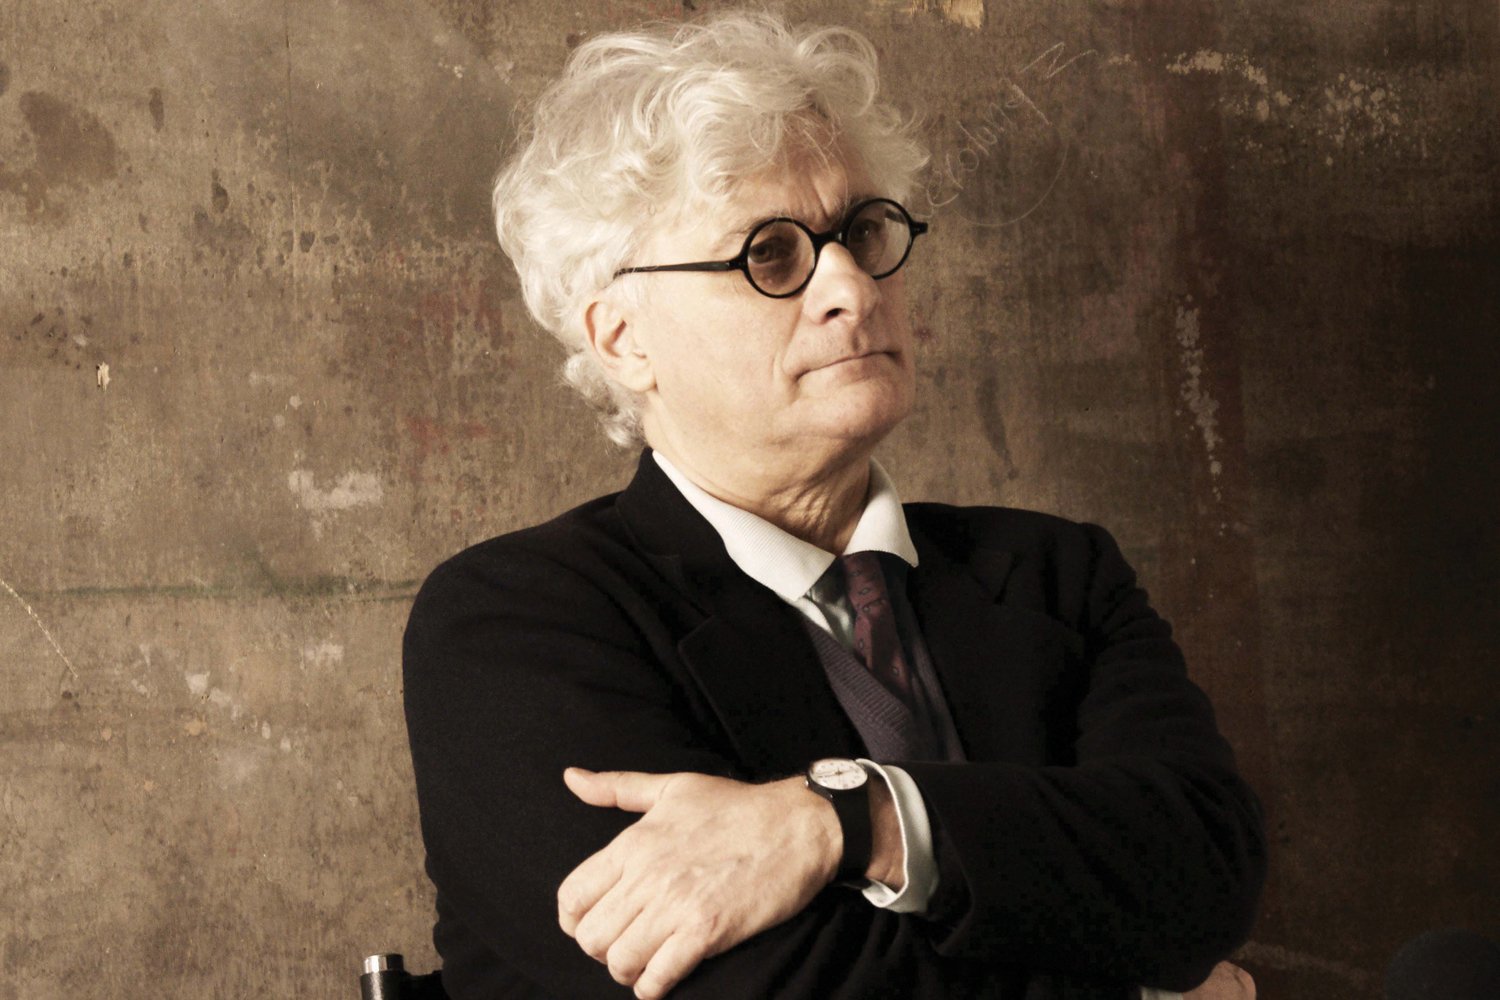 “The Age of Impotence and the Horizon of the Possible.” A lecture by Franco “Bifo” Berardi as part of Resources